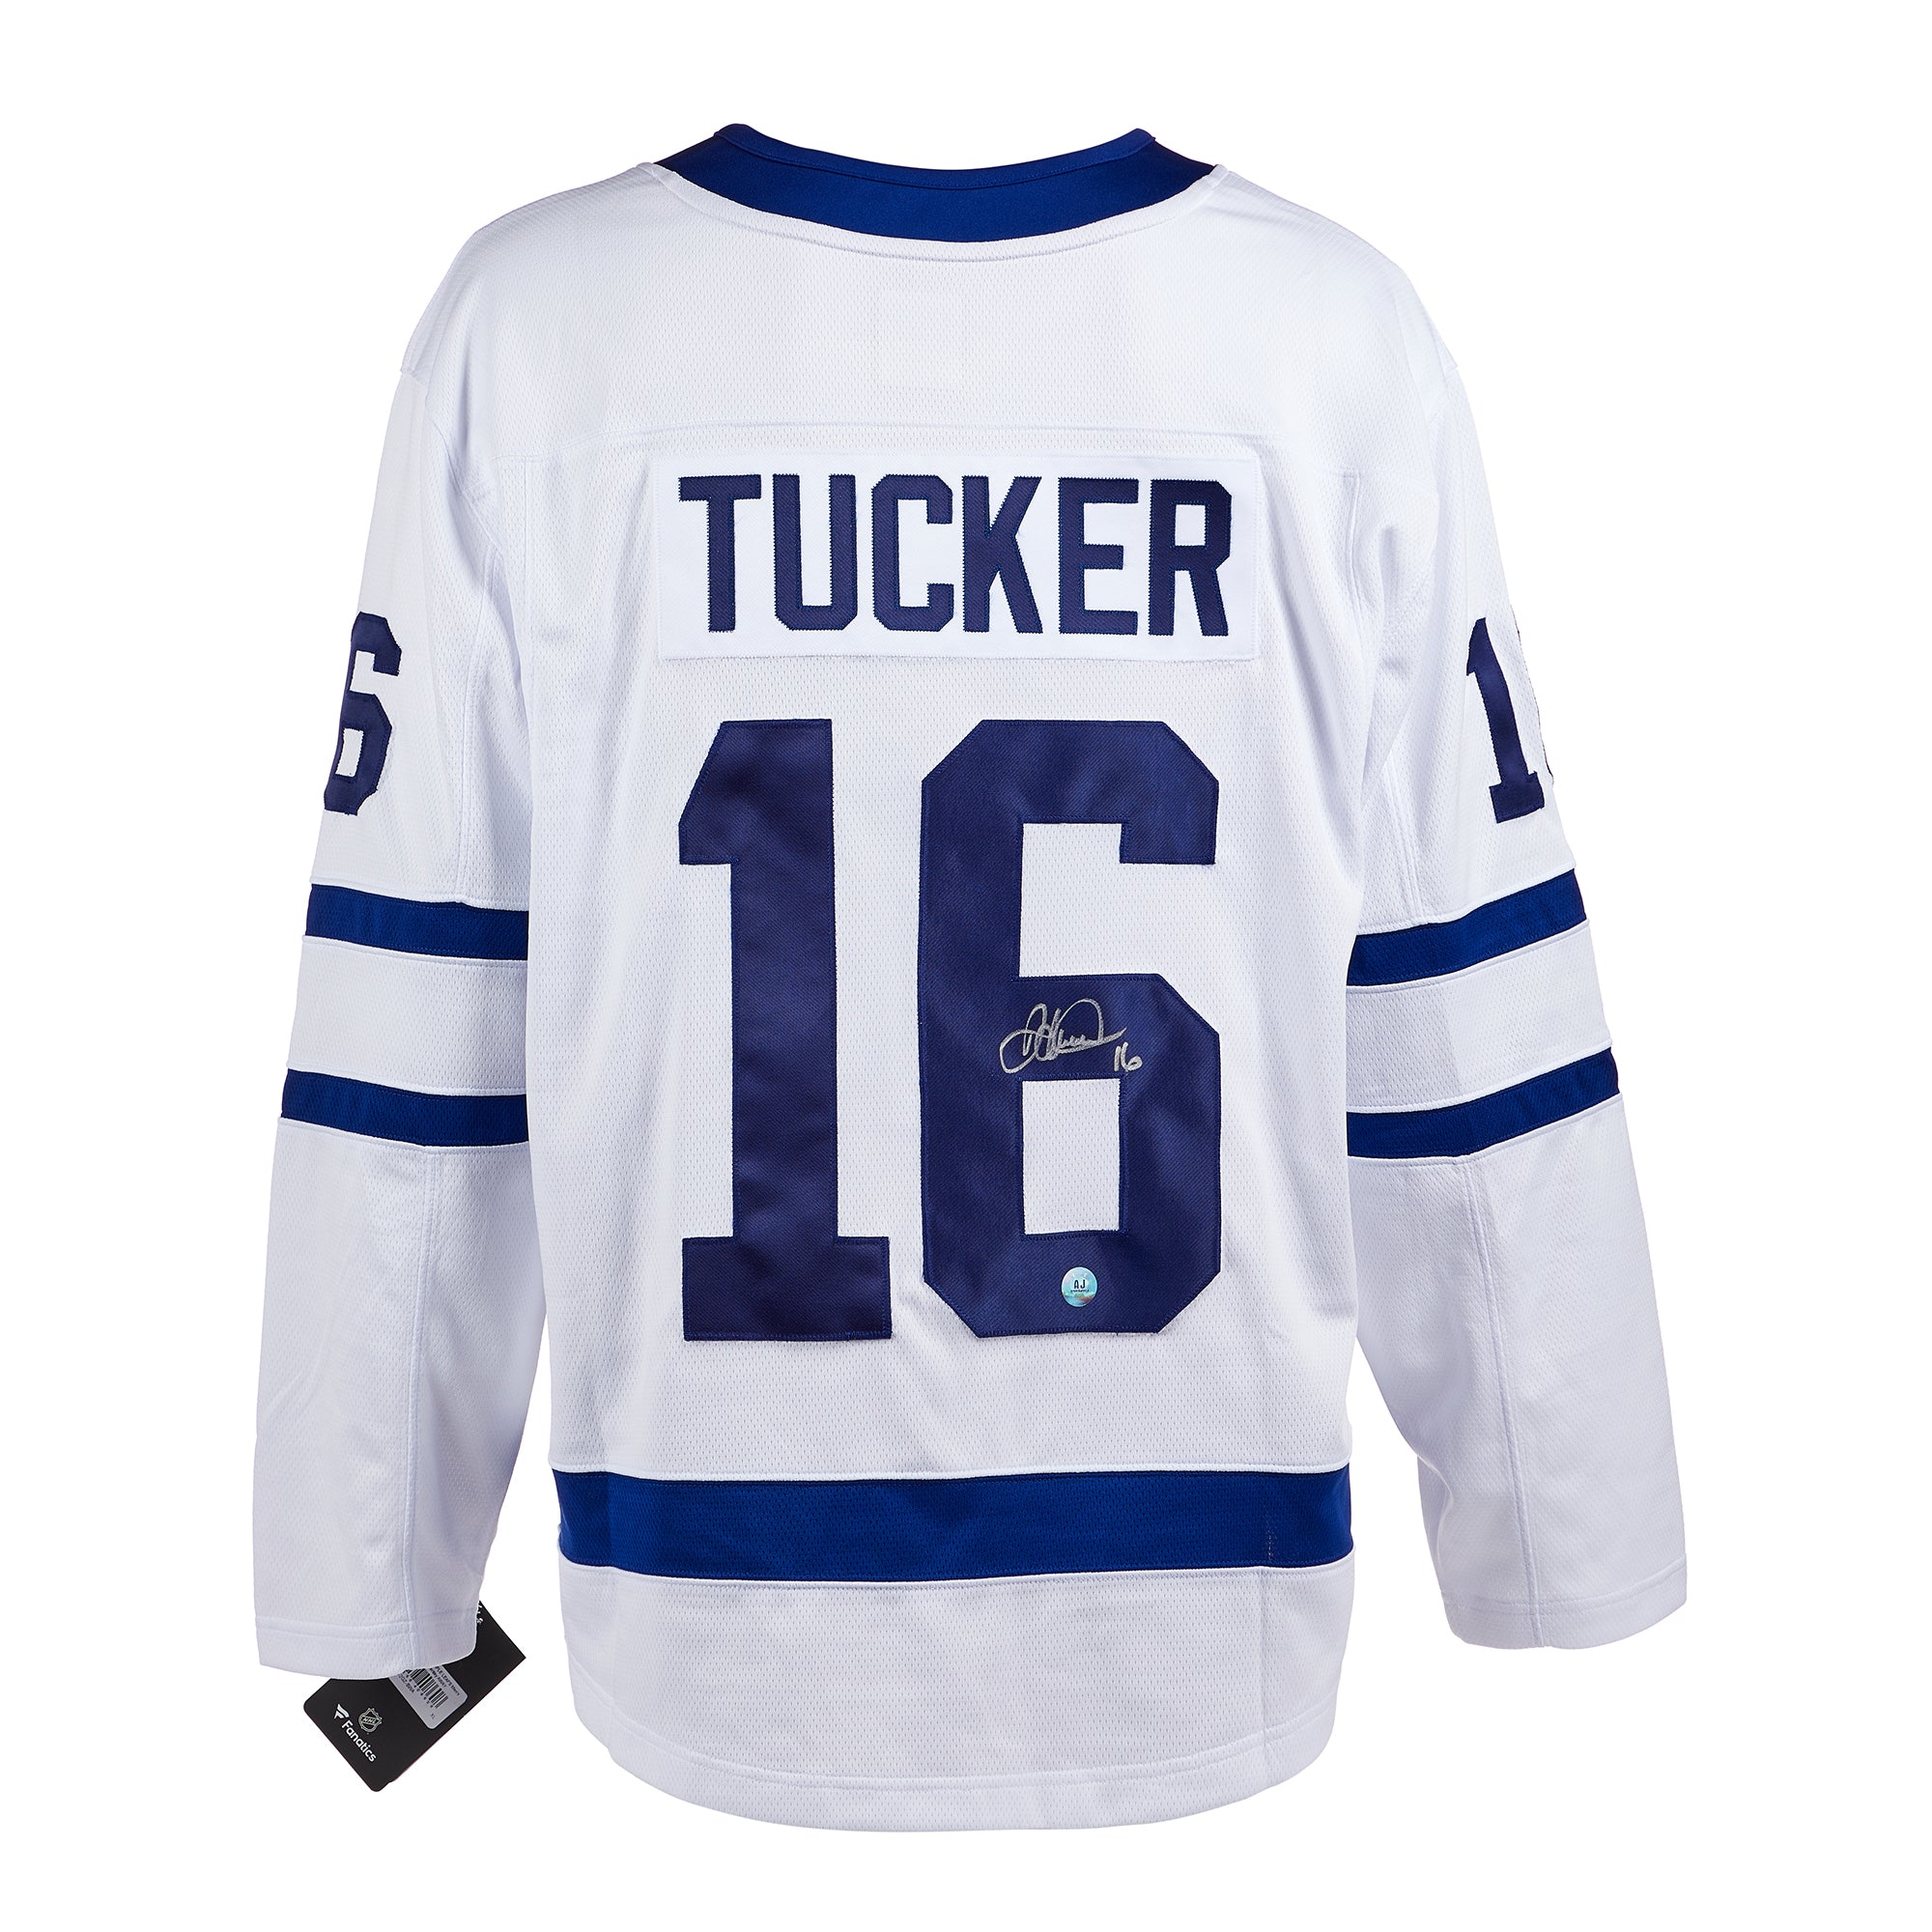 Darcy Tucker signed autograph Toronto Maple Leafs jersey